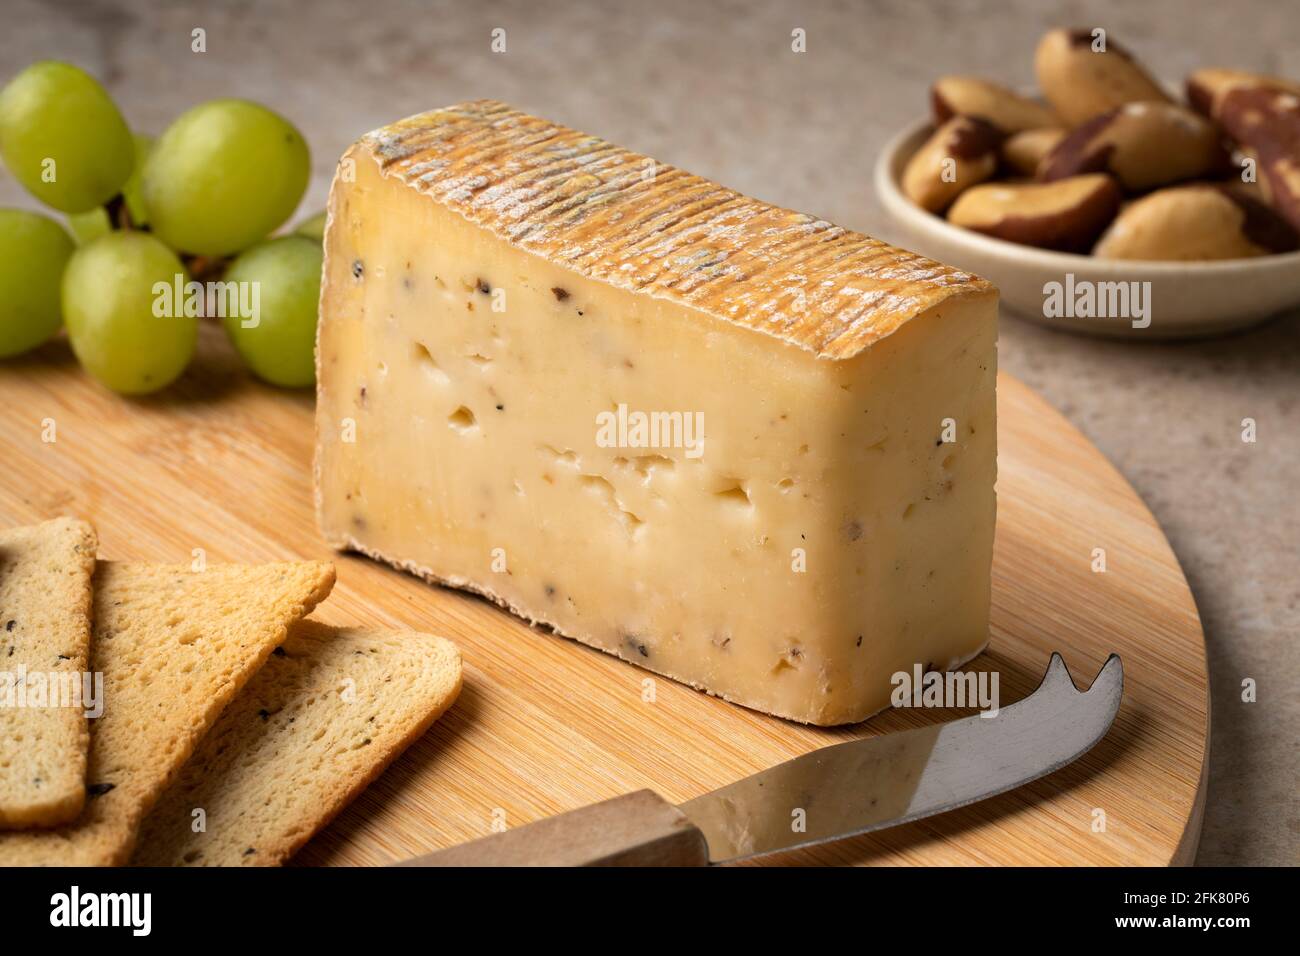 Cutting board with Italian Taleggio Tartufo cheese close up as a snack or appetizer Stock Photo